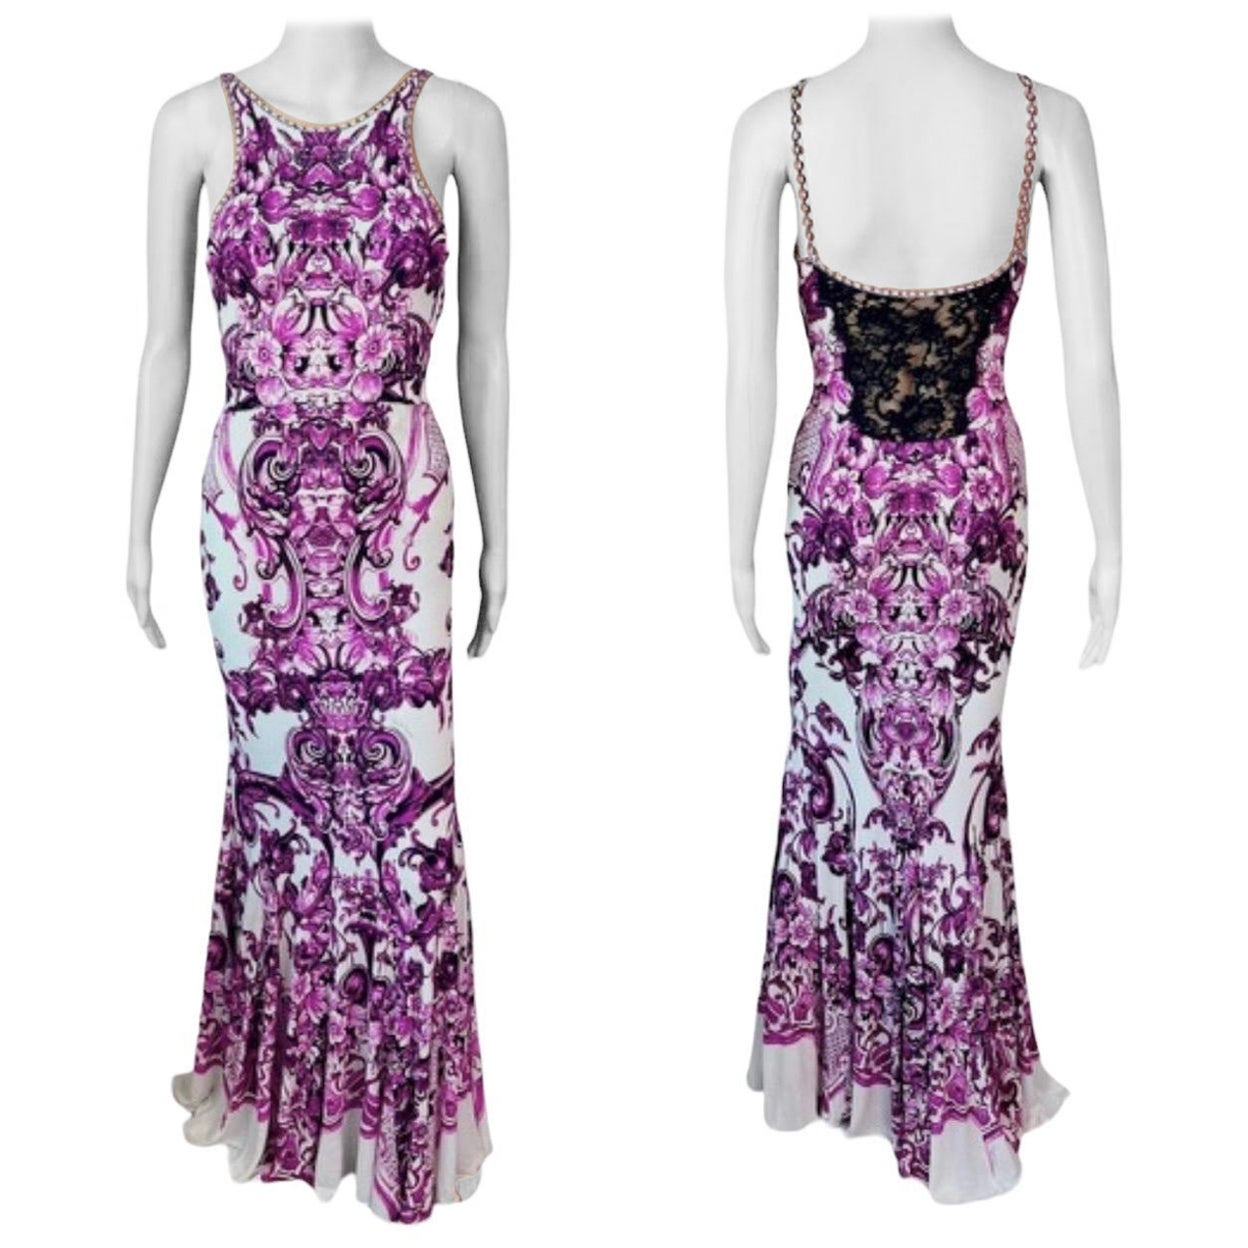 Roberto Cavalli Resort 2013 Chinoiserie Ming Porcelain Sheer Lace Evening Dress For Sale